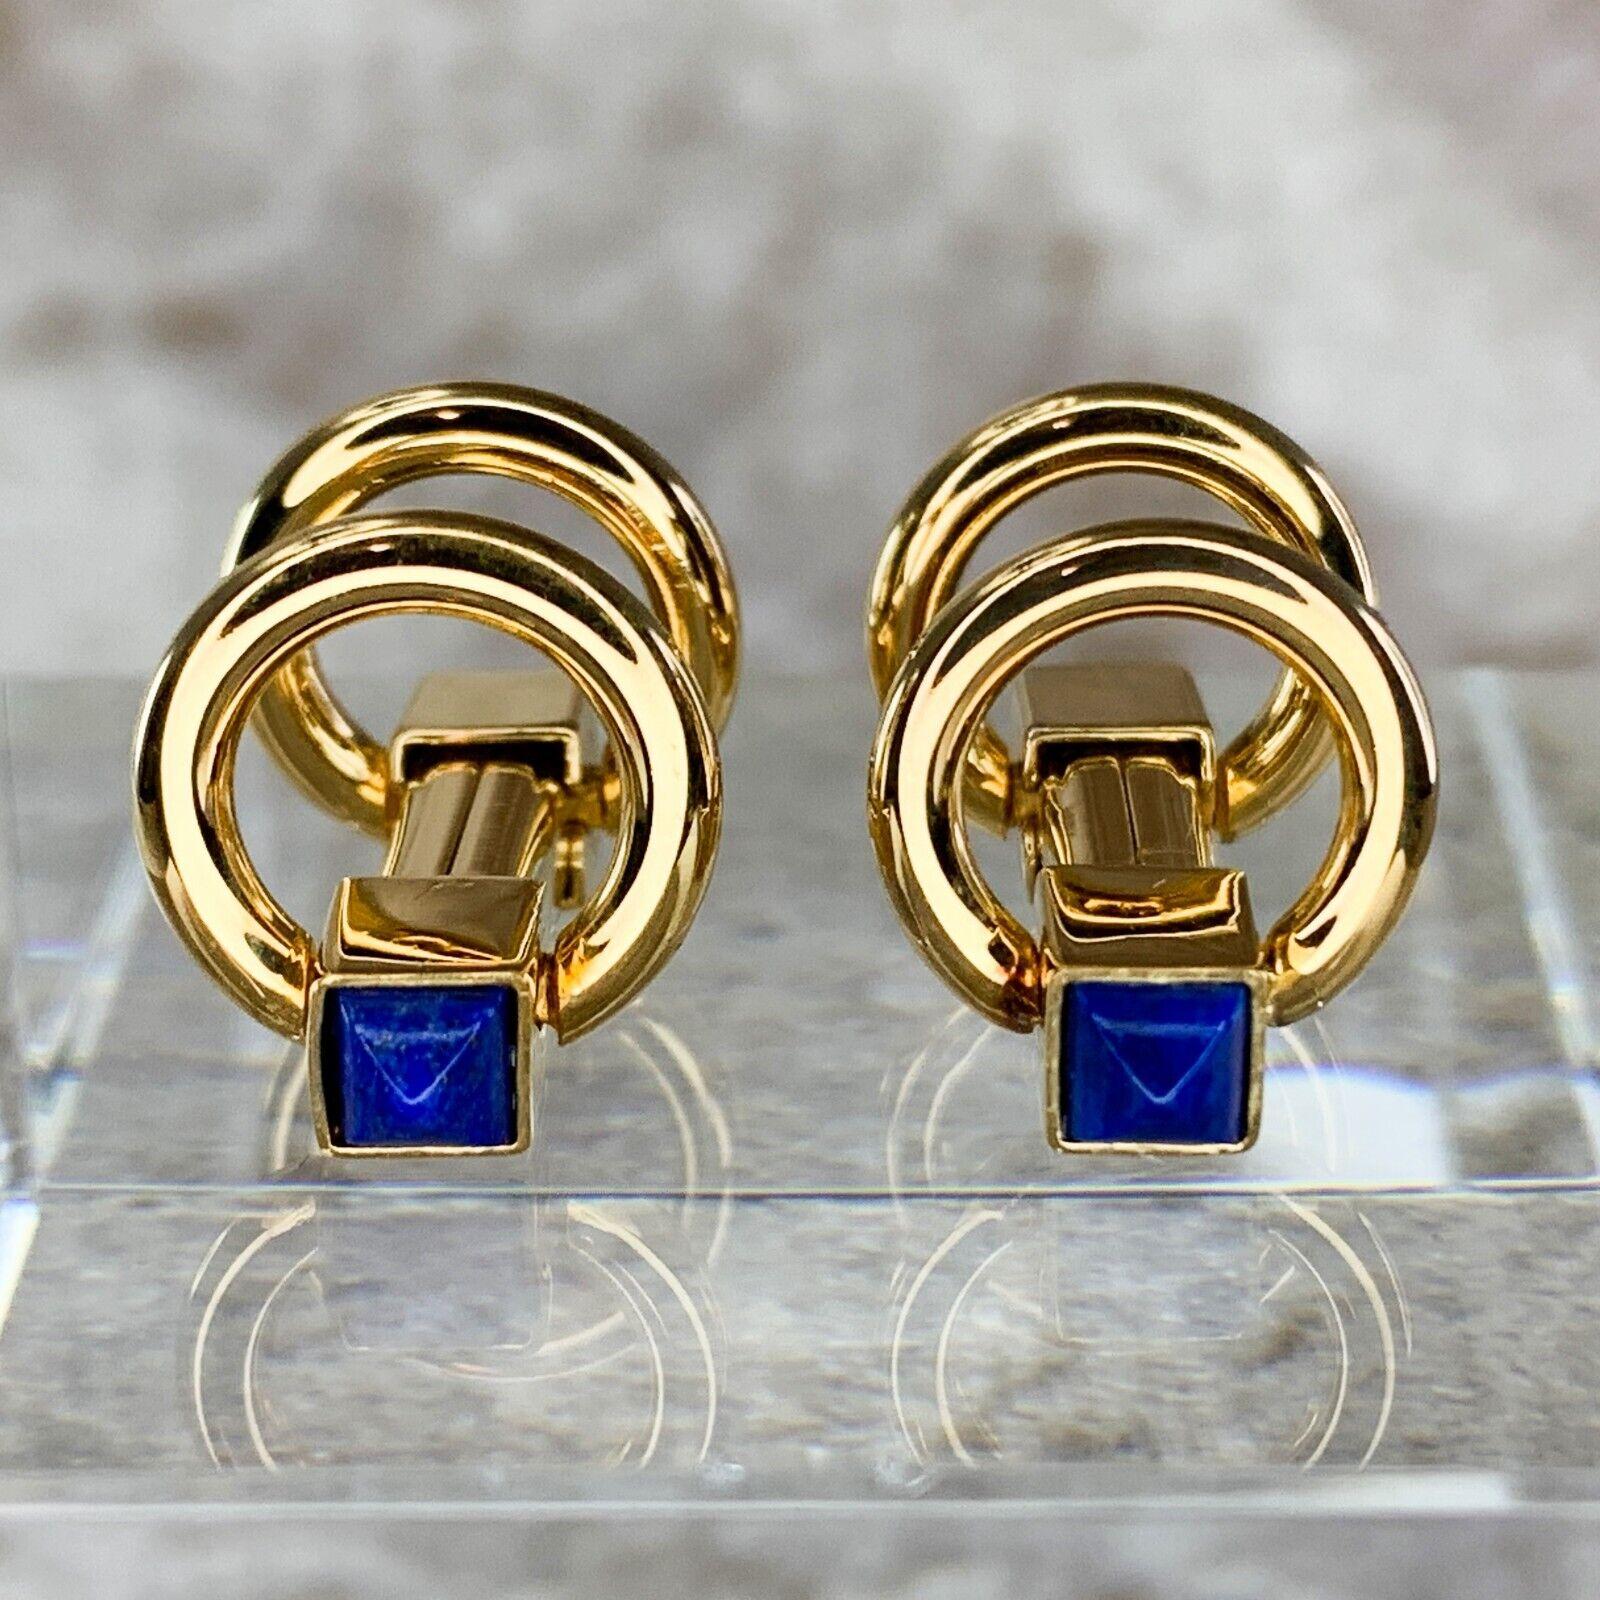 Vintage Dunhill Cufflinks Gold Plated Blue Lapis Lazuli, Circa 2000 In Excellent Condition For Sale In New York, NY